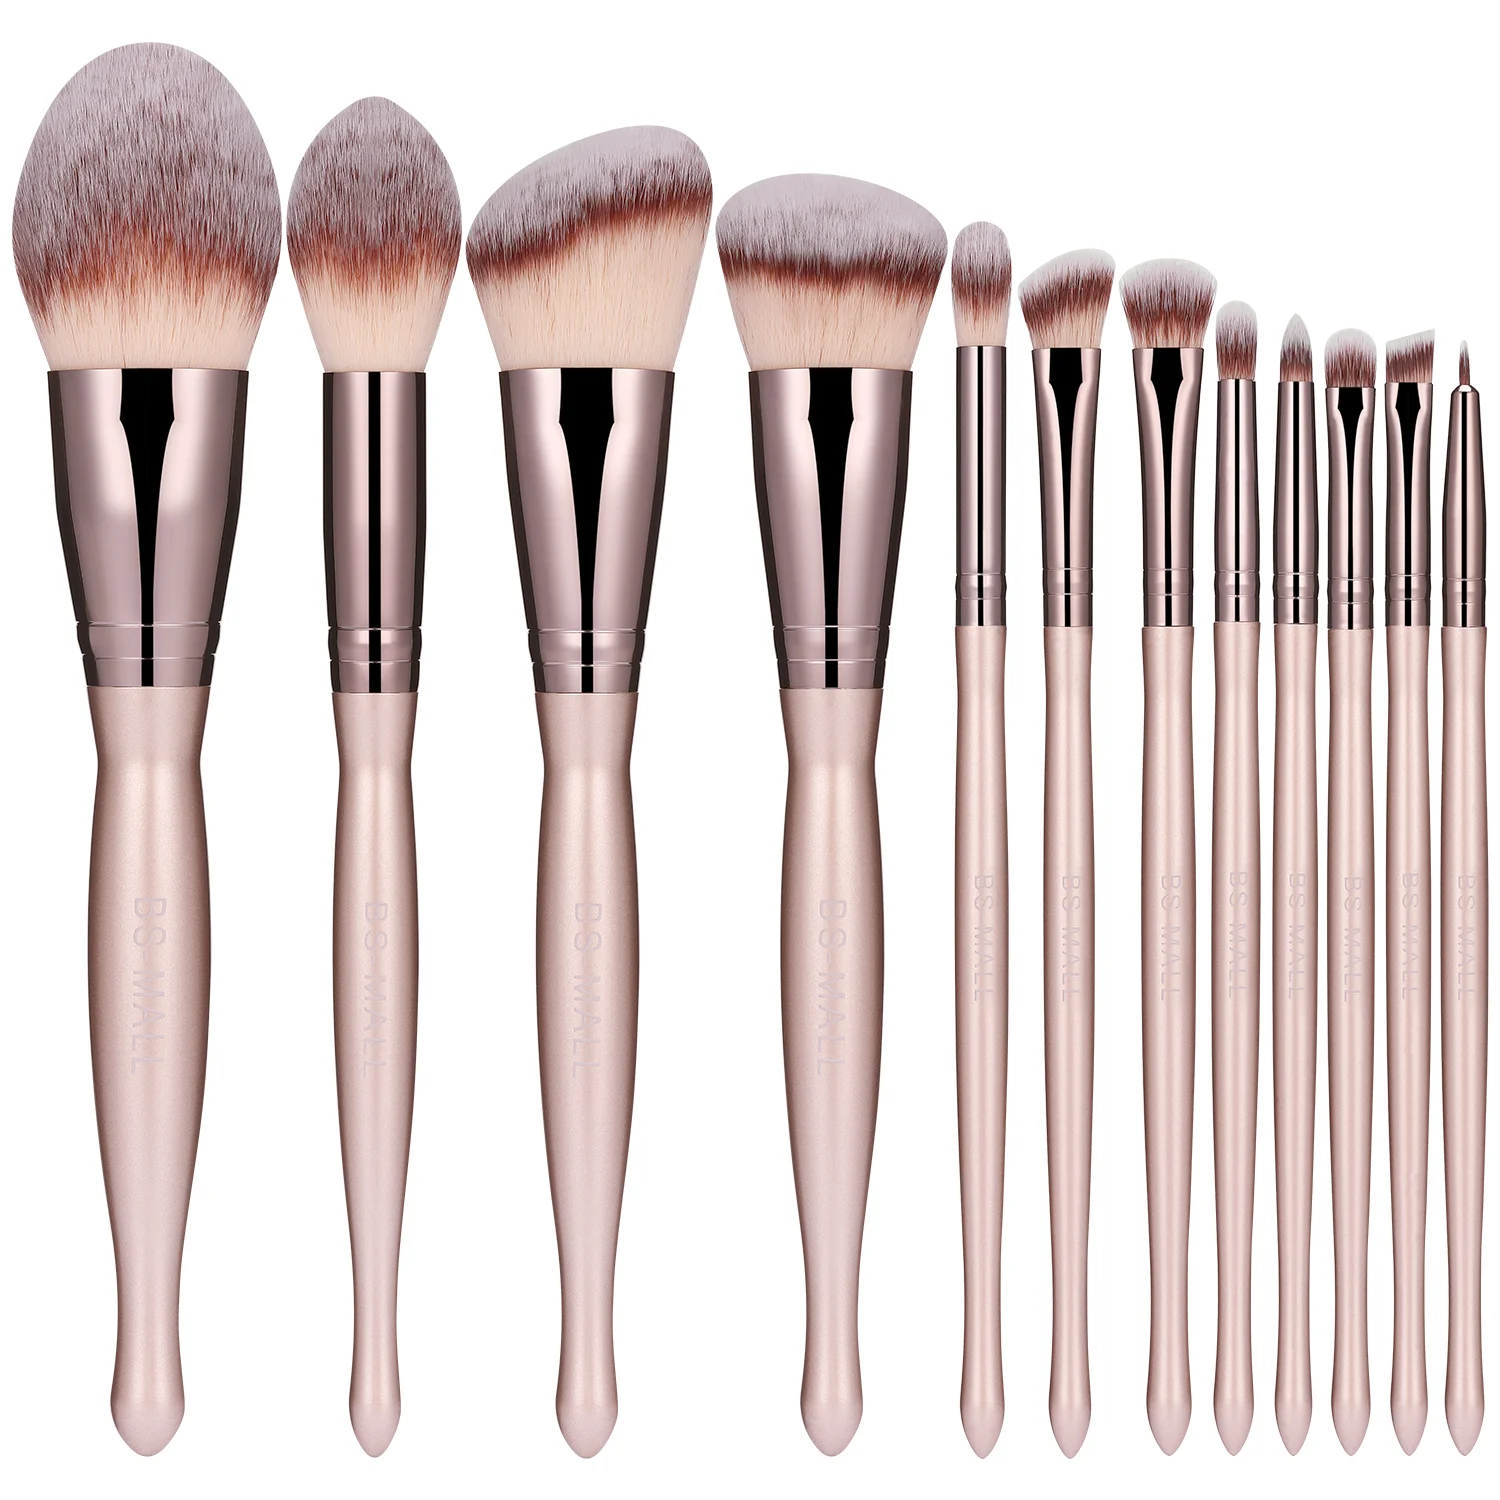 

BS-MALL 12pcs Champagne Make Up Brush Professional Soft Synthetic Makeup Applicator Brushes Set